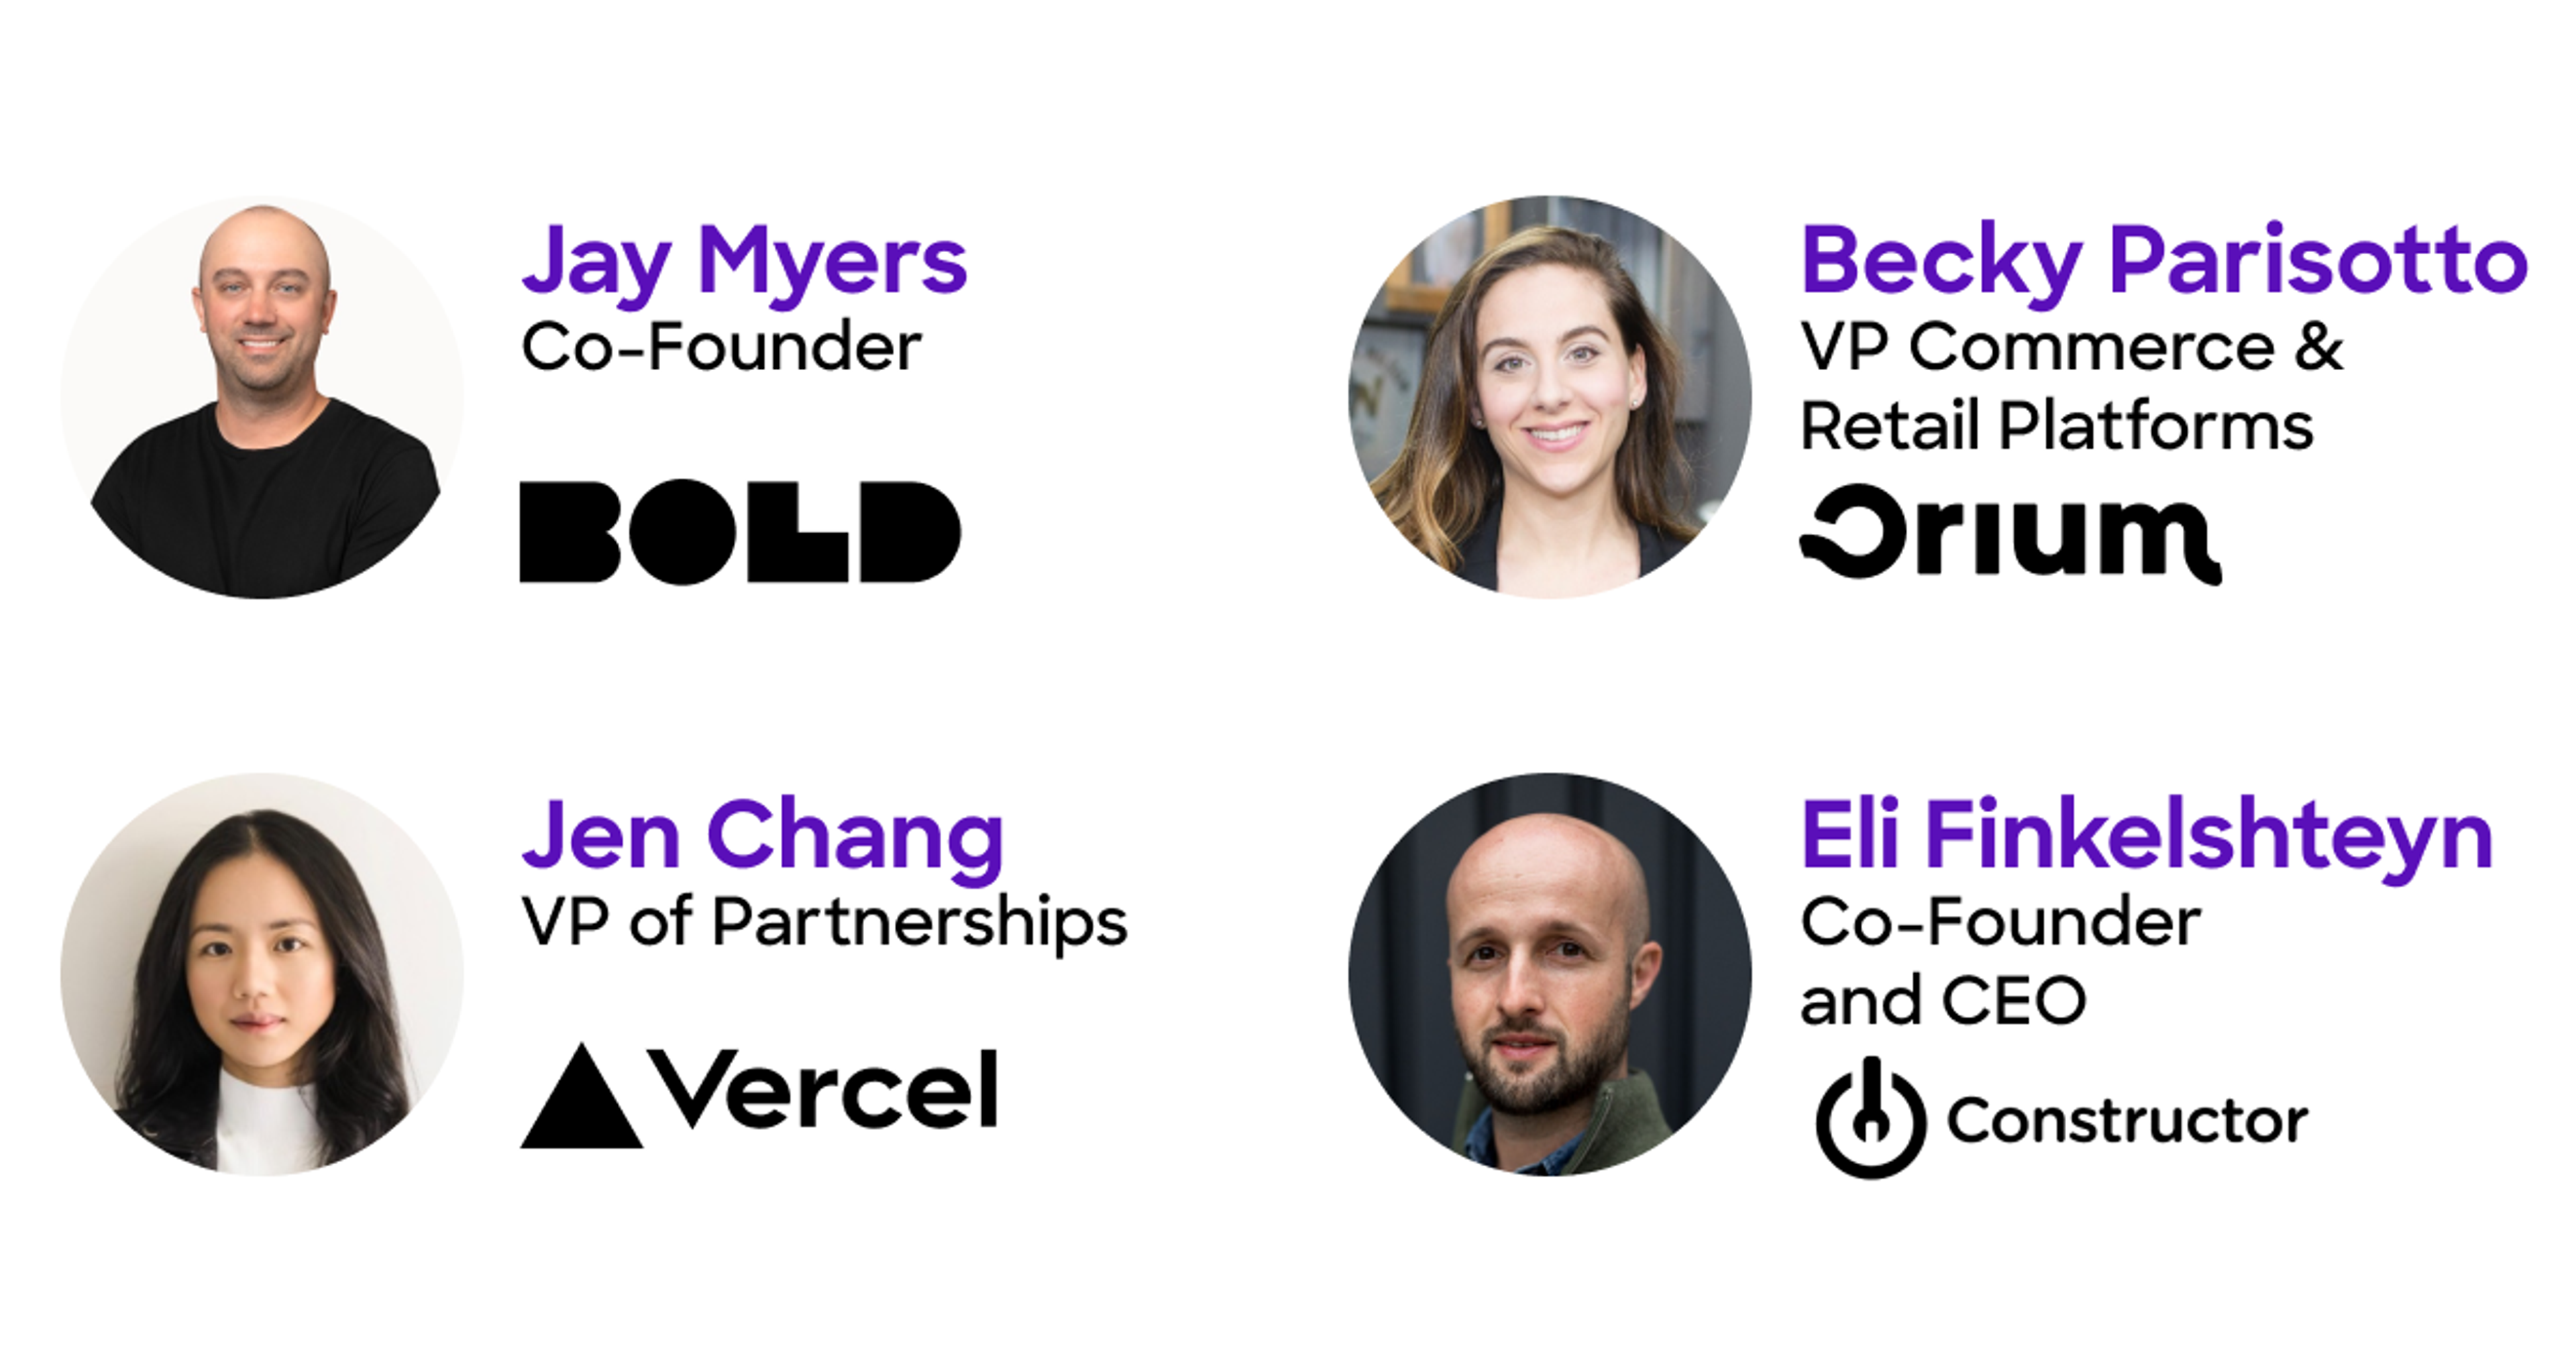 Meet the panel: Jay Myers Co-Founder Bold Commerce, Becky Parisotto, VP Commerce & Retail Platforms Orium, Jen Chang, VP of Partnerships, Vercel and Eli Finkelshteyn, Co-Founder and CEO Constructor.io, provide the plain truth on moving from a monolith to MACH.